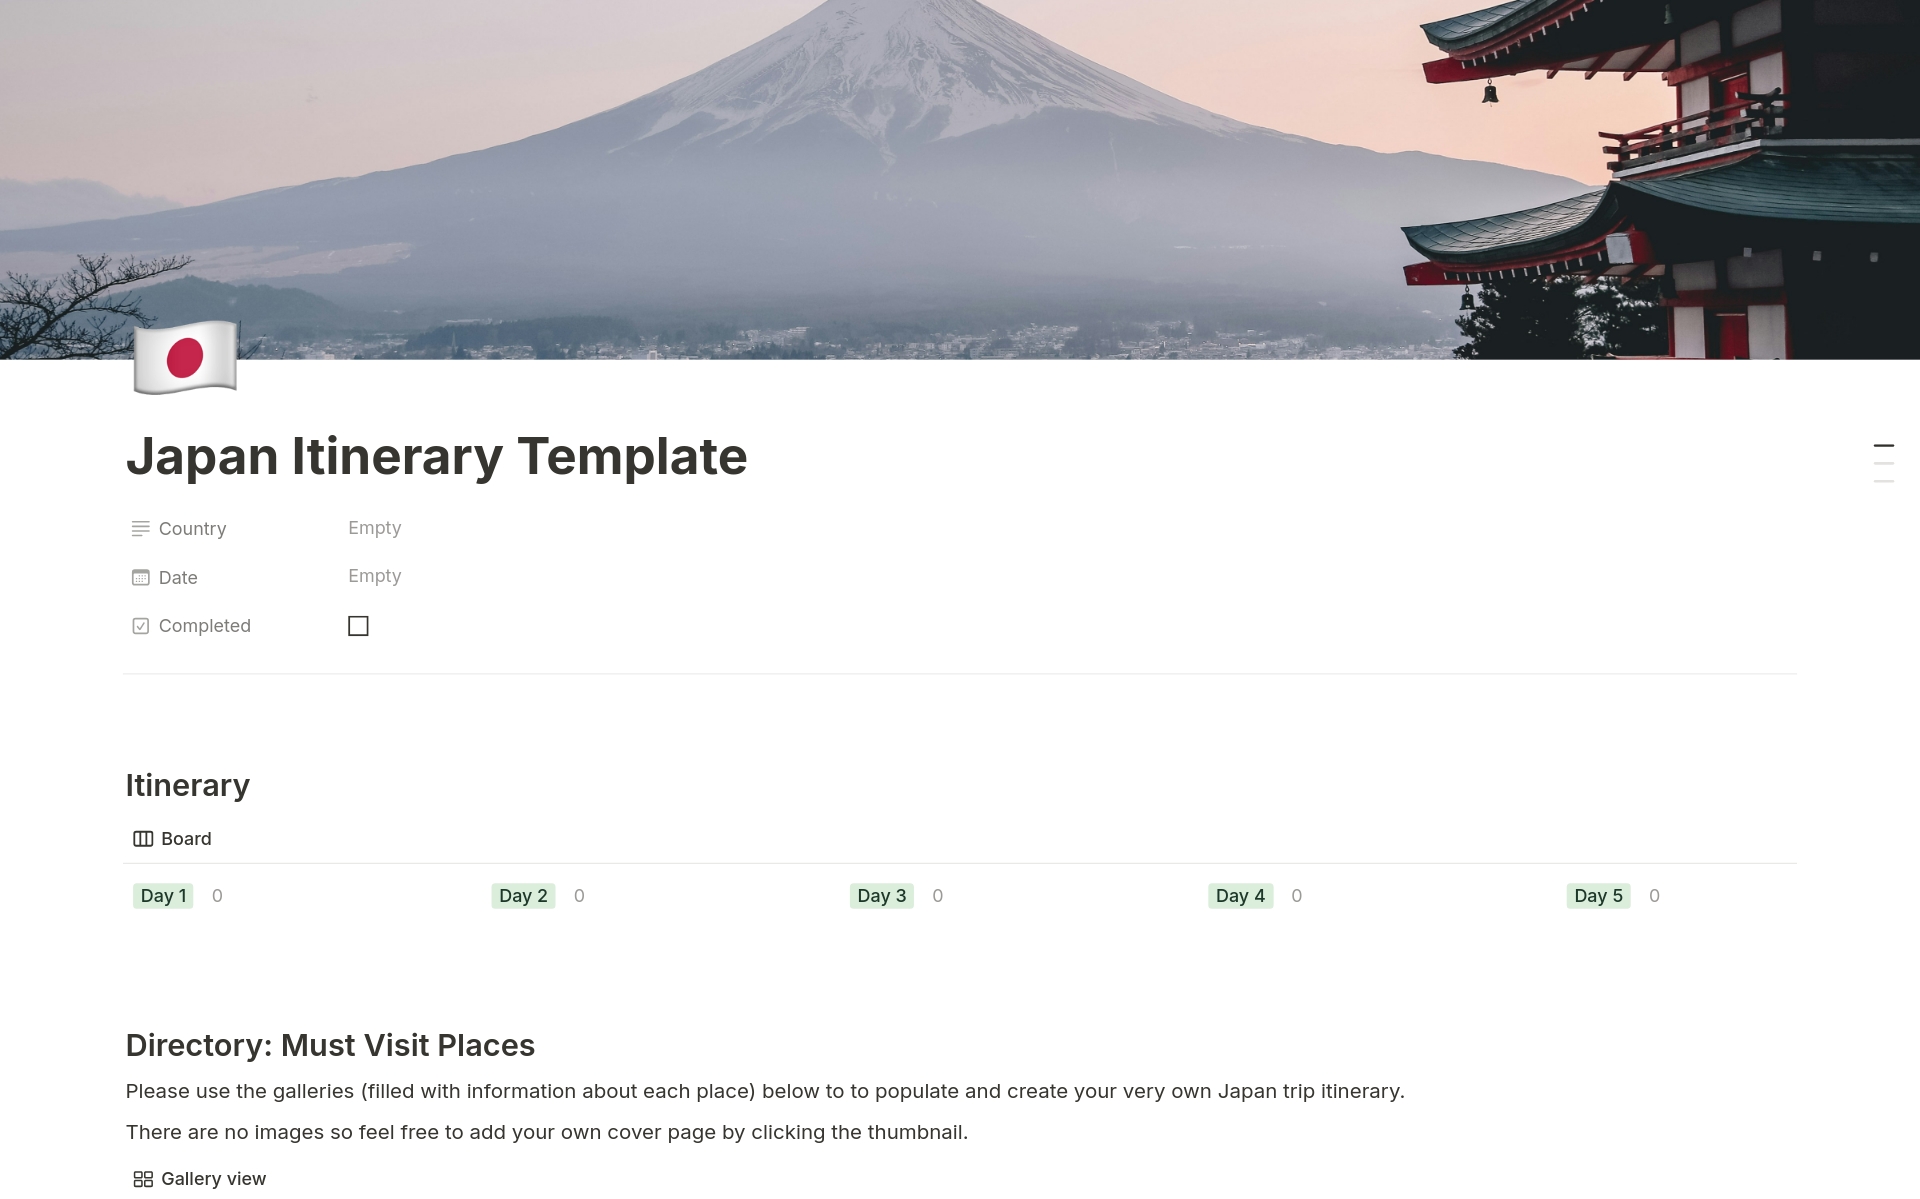 Planning a trip to Japan but unsure where to start? No worries! Use my itinerary template and directory, packed with amazing destinations and detailed information to enhance your trip—all for free.